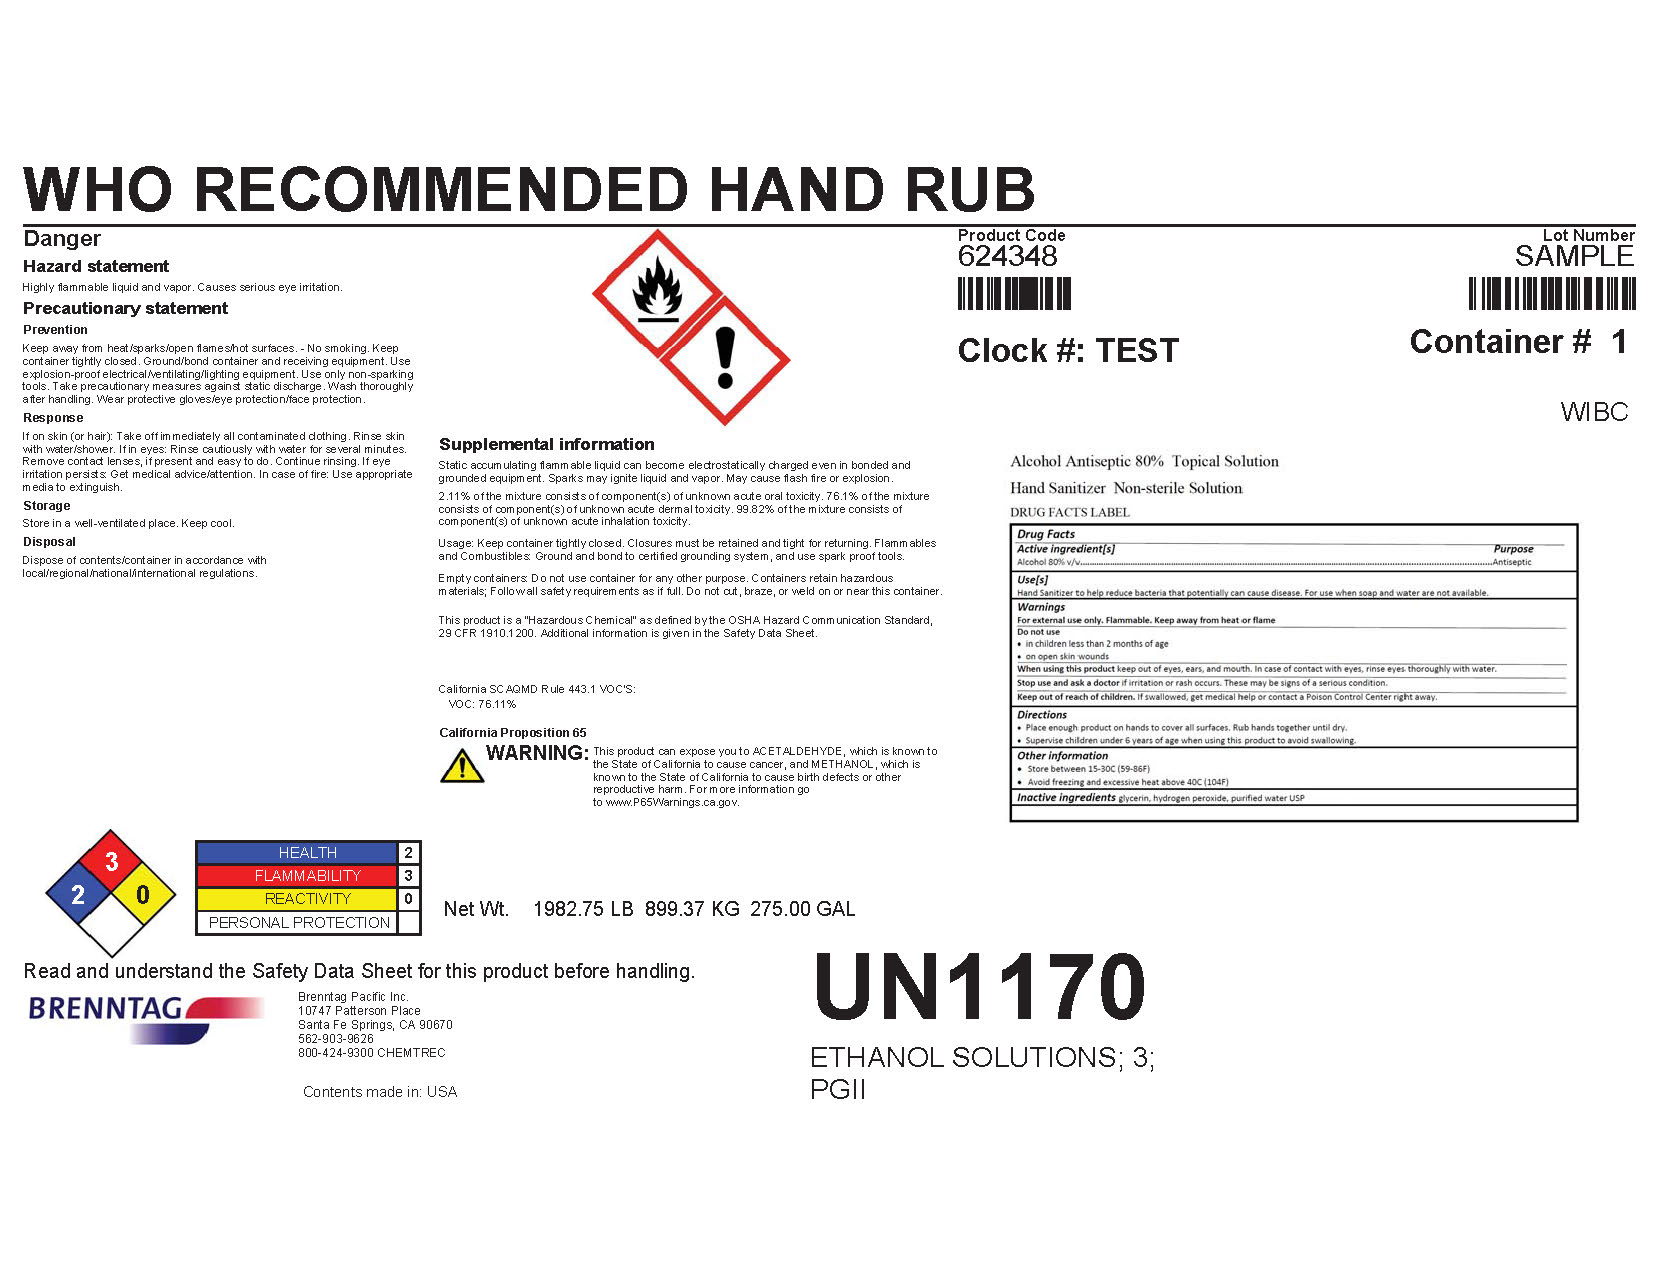 WHO RECEOMMENDED HAND RUB